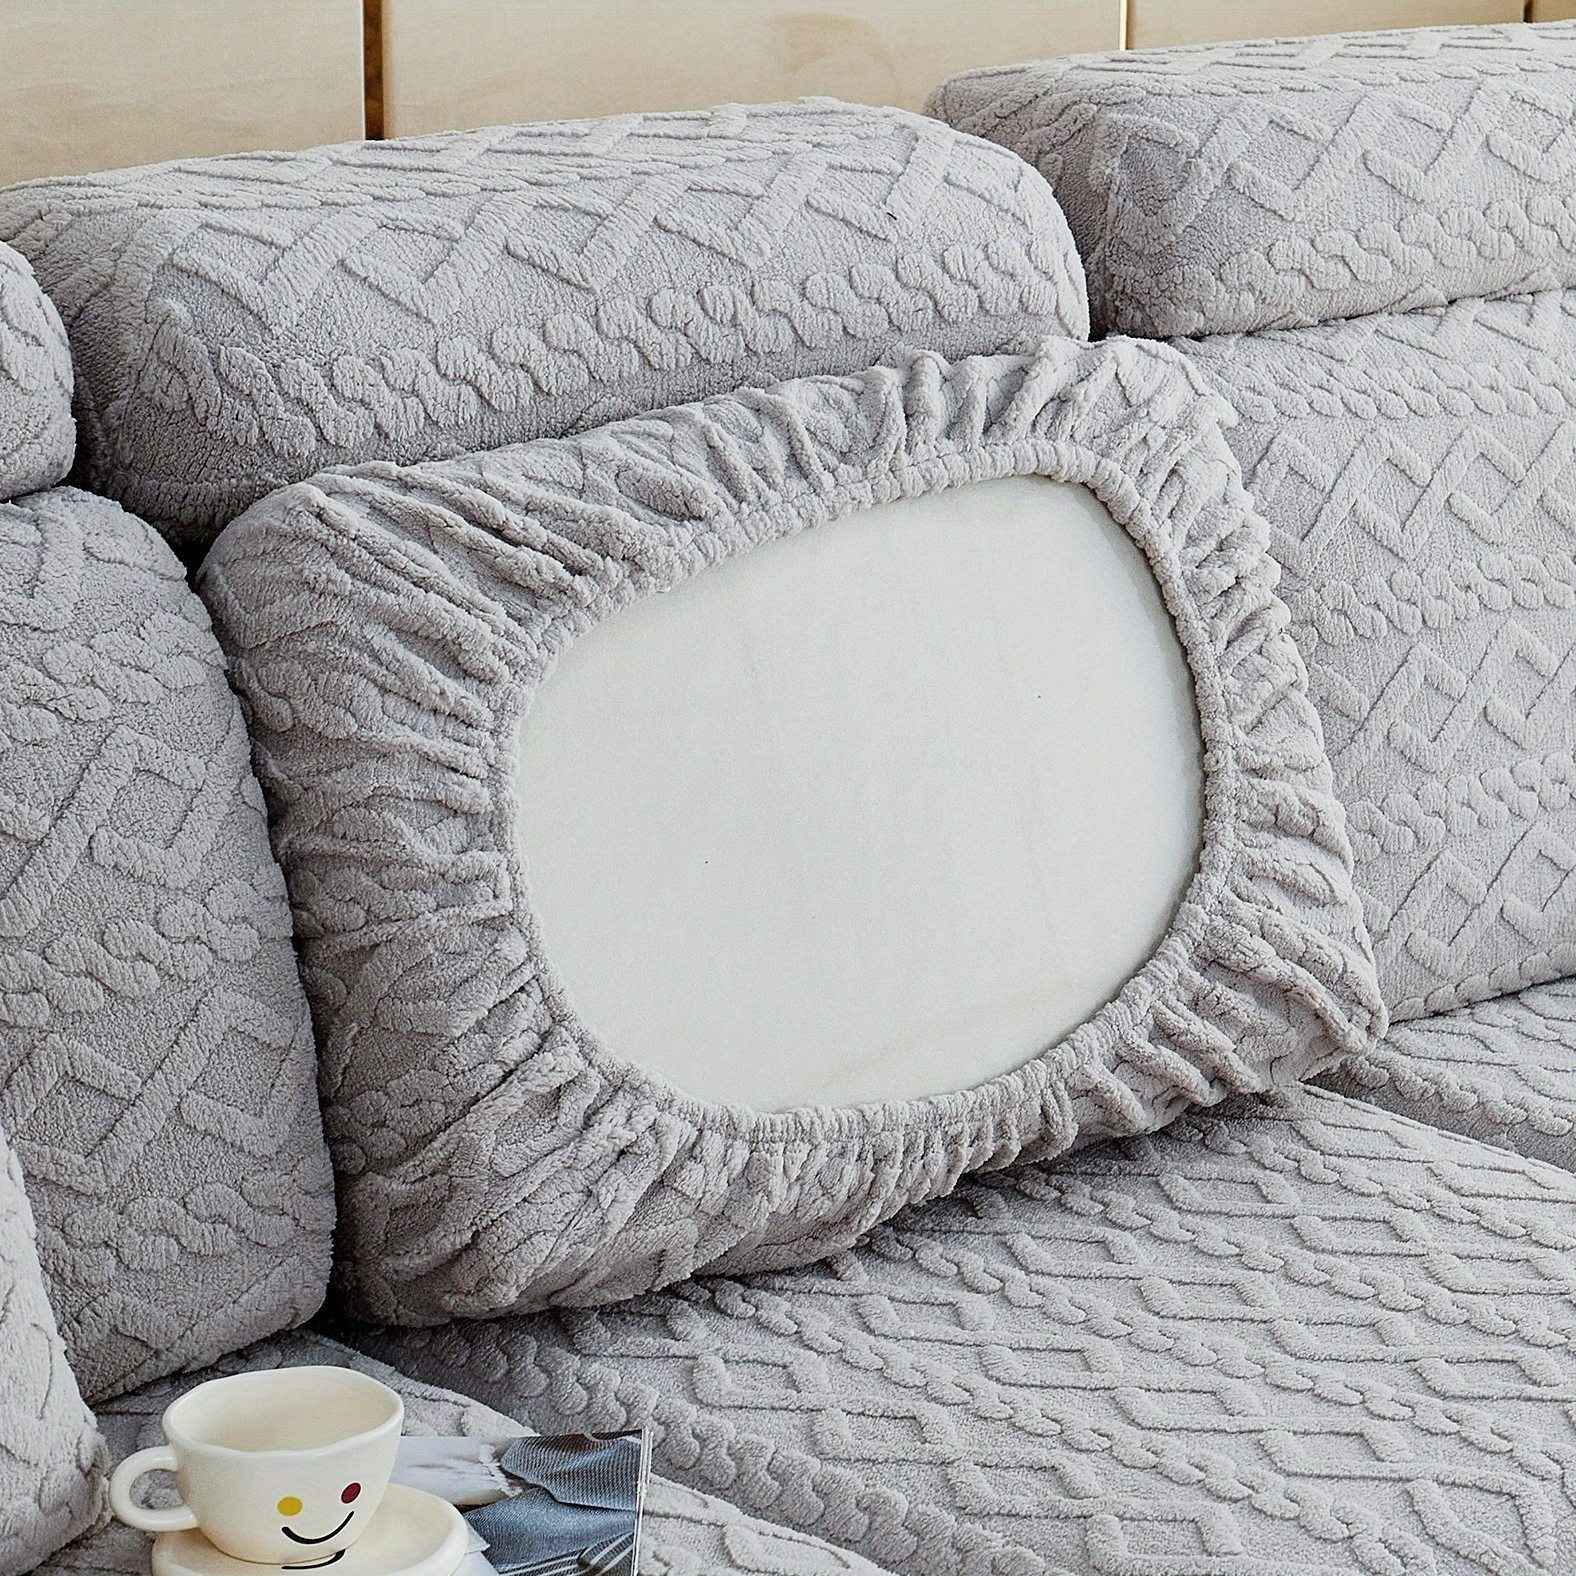 Anti-Slip Sectional Couch Cover, Thicken Sofa Slipcover